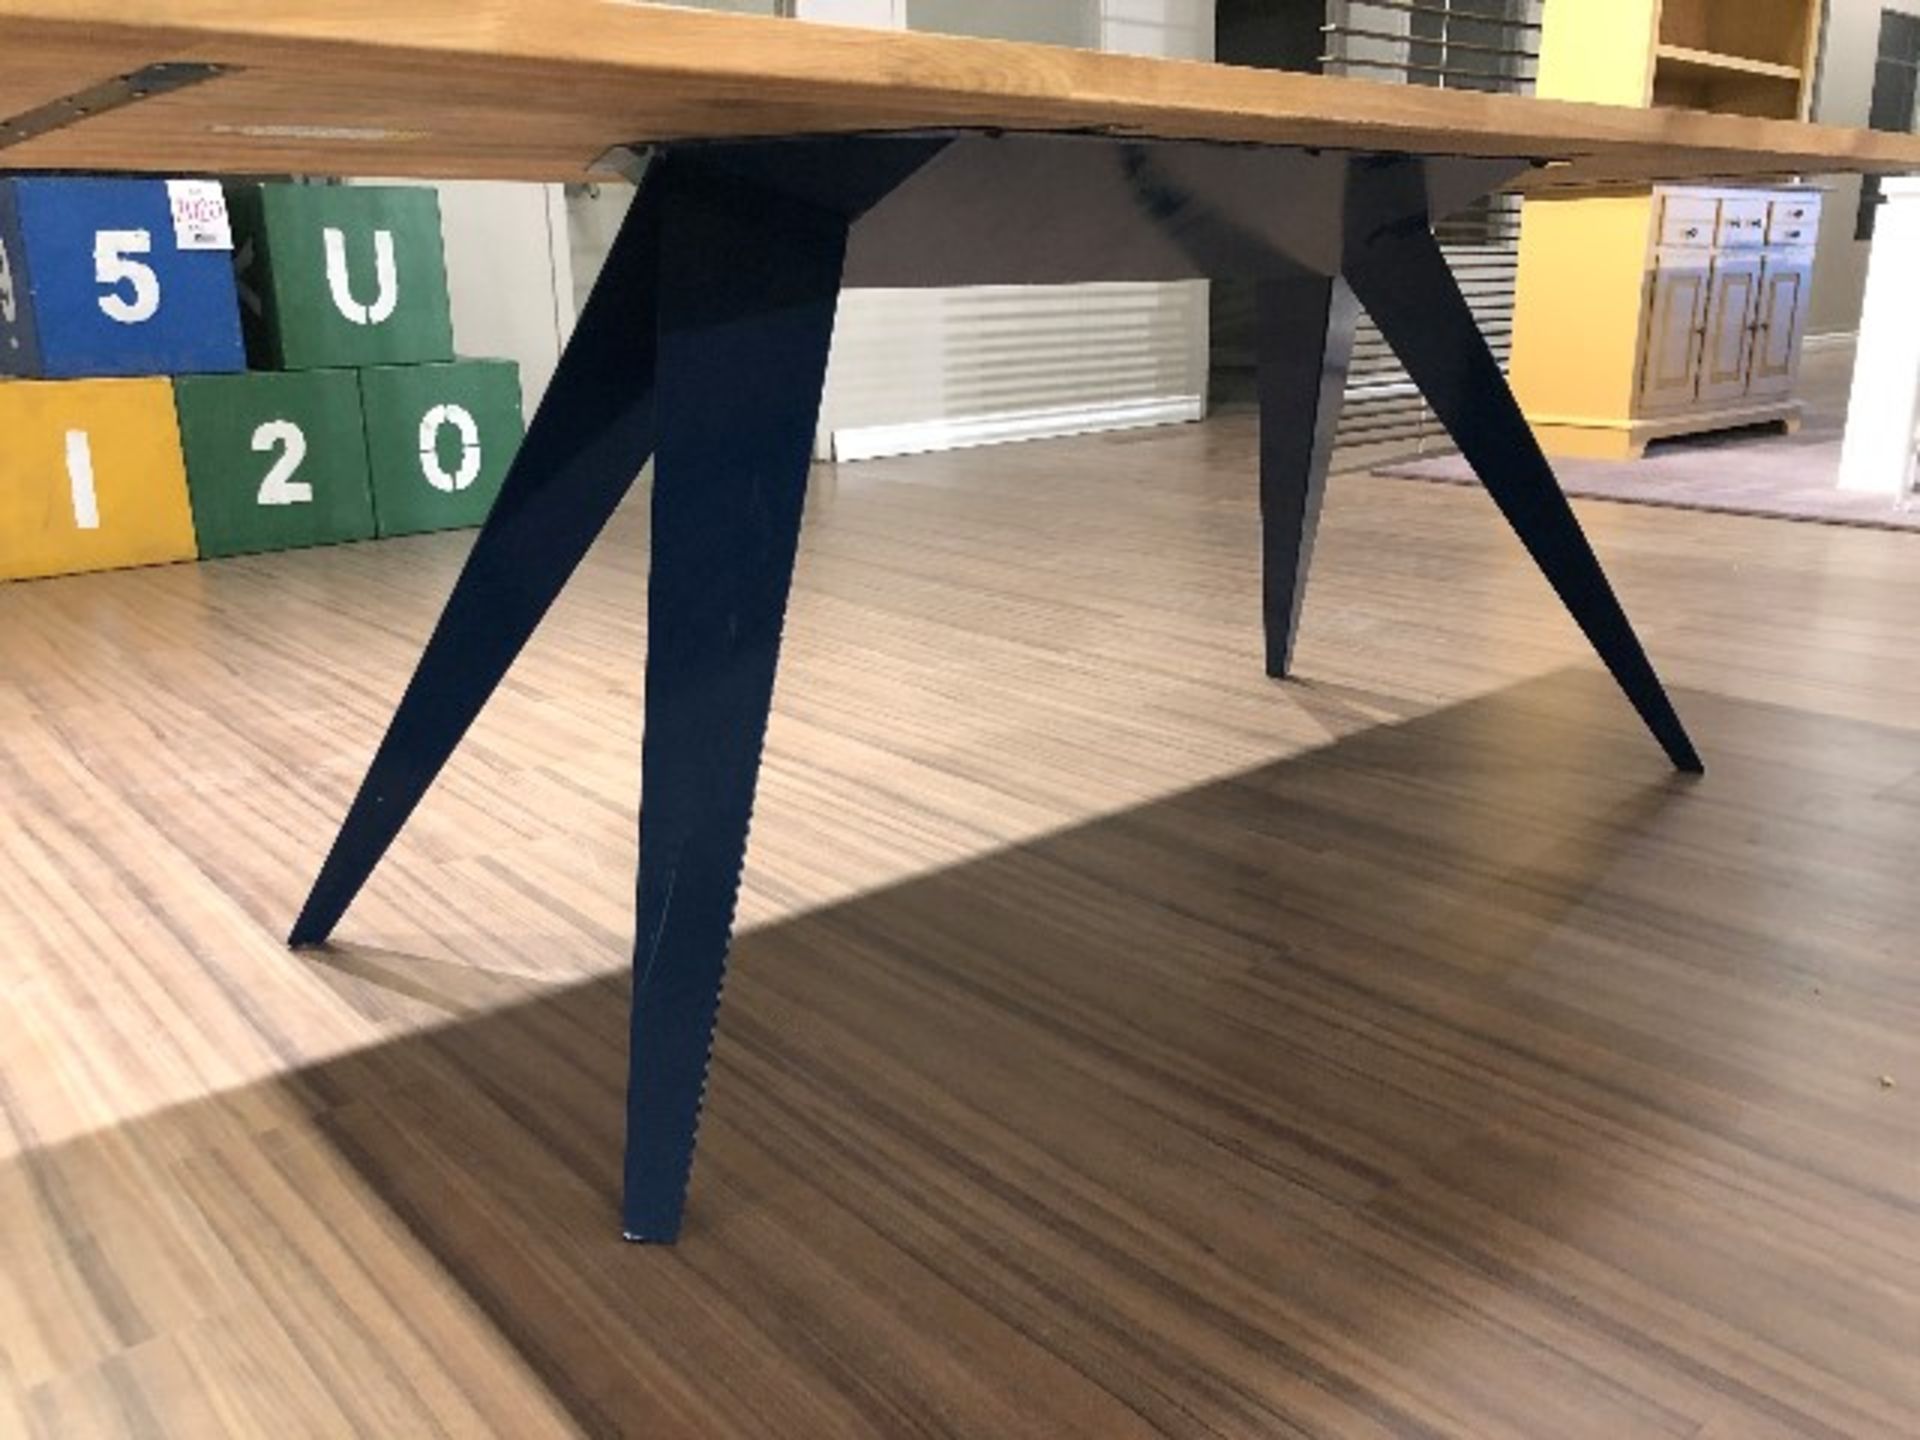 Butcher block style table w/metal base, 82”x35”x29” - Image 2 of 3